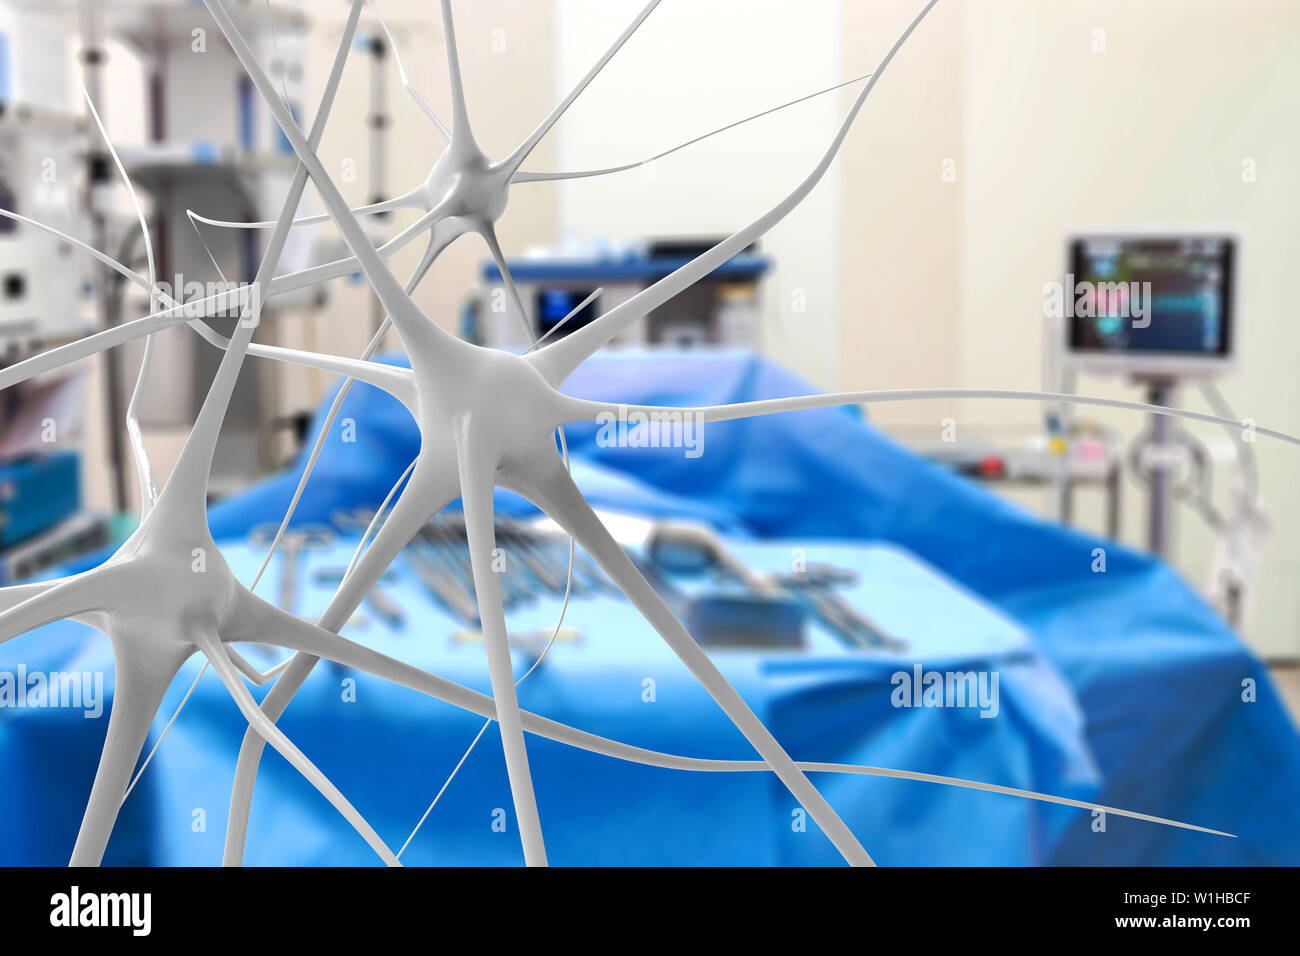 Artificial intelligence in smart healthcare hospital technology concept. AI biomedical algorithm and machine learning detect brain stem cell neurons. Stock Photo